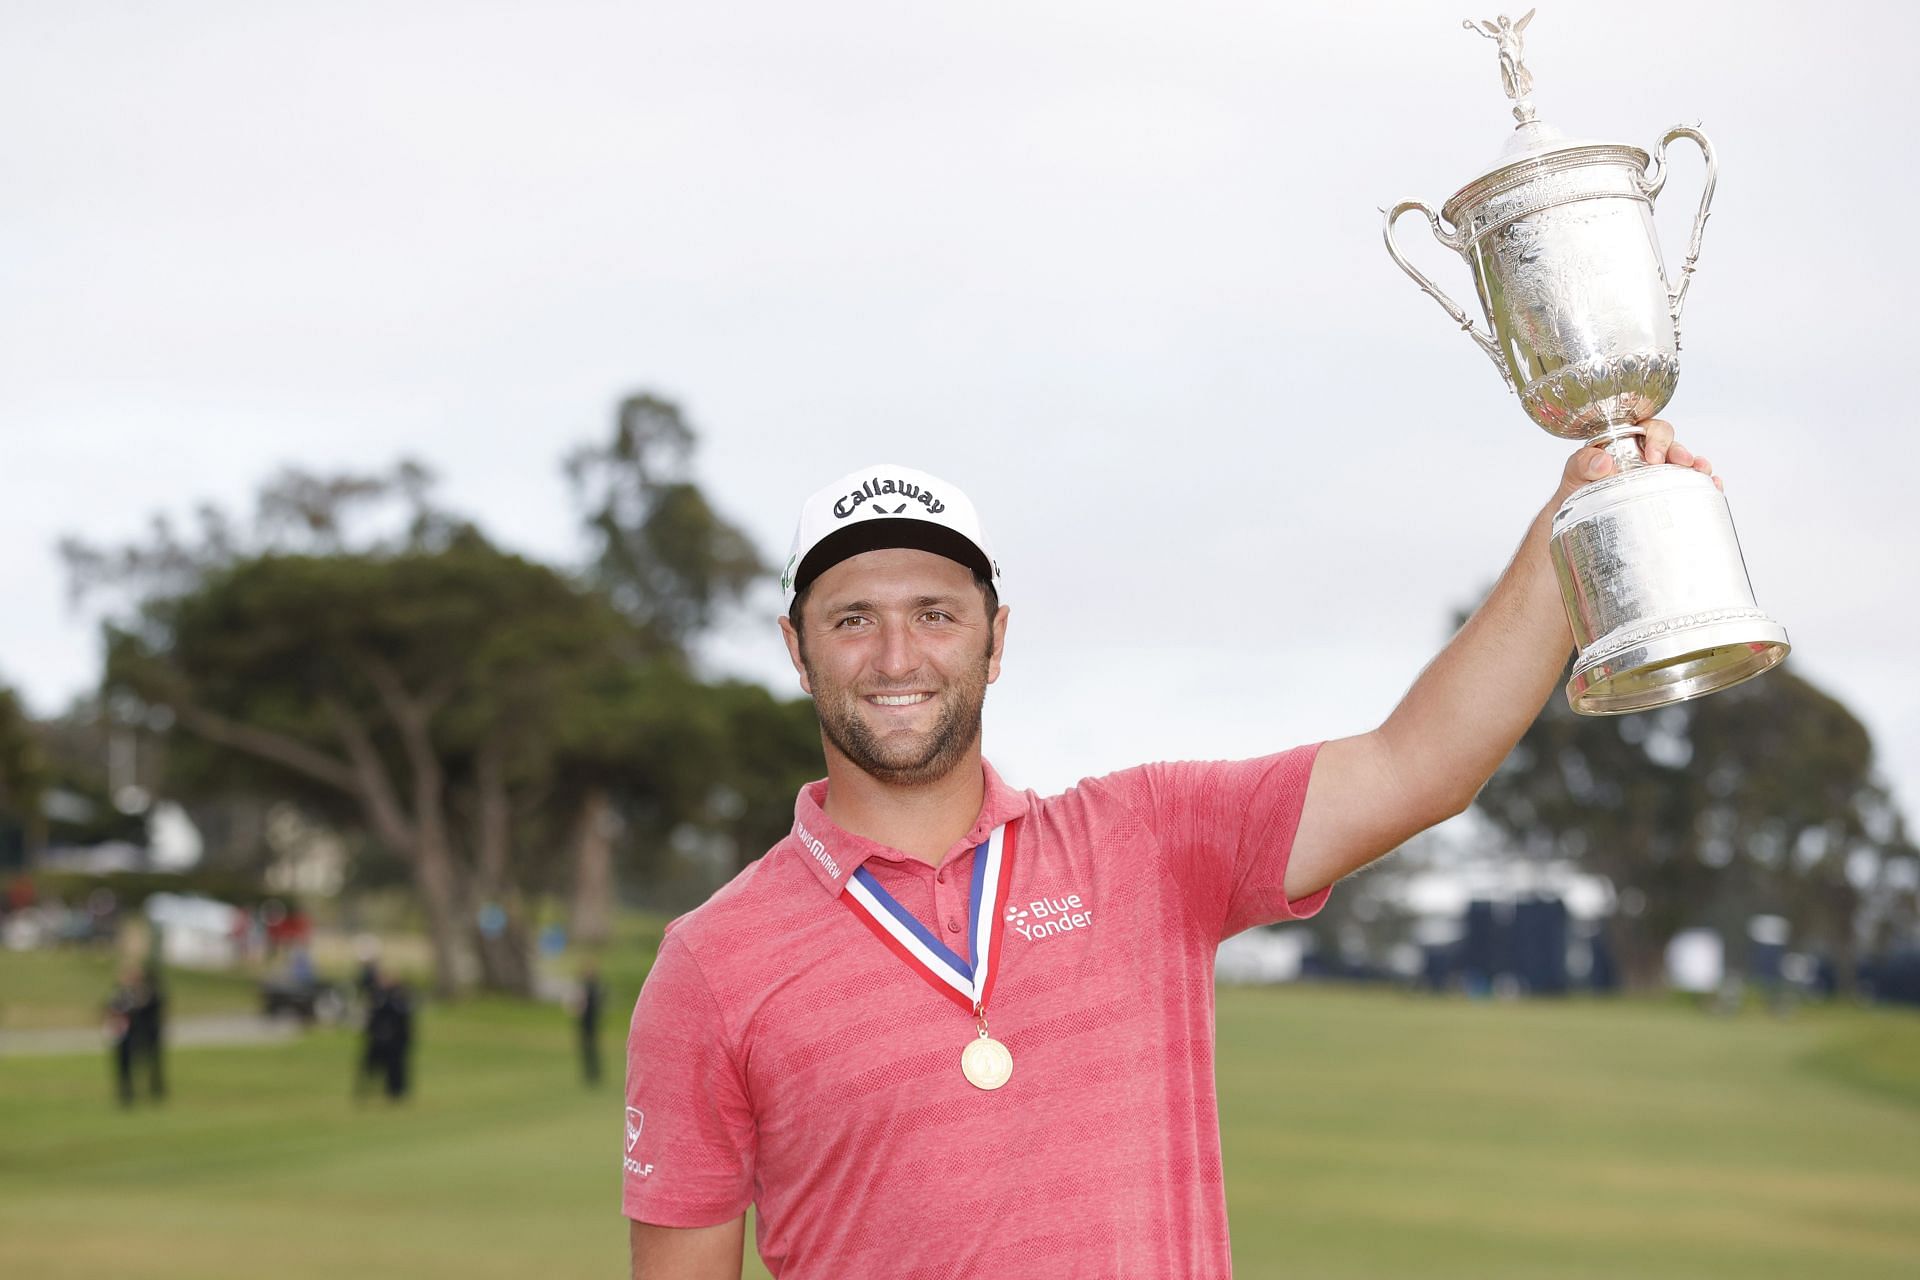 Jon Rahm wearing the Jack Nicklaus medal and holding the U.S. Open Trophy in 2021 (via Getty Images)